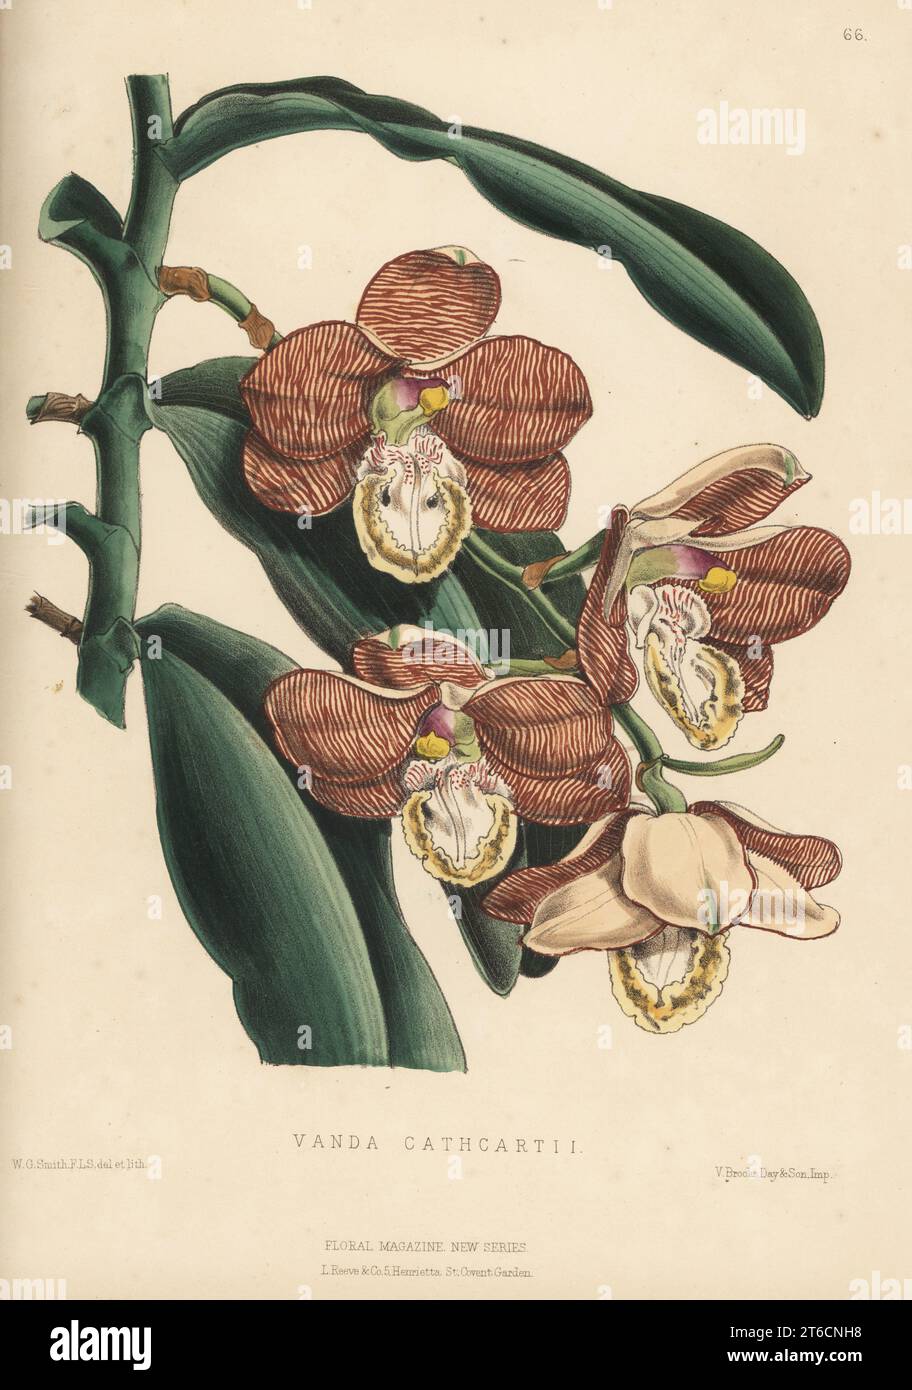 Scorpion orchid, Arachnis cathcartii. Native of Eastern Himalaya. As Vanda cathcartii from a specimen in Veitch and Sons nursery, King's Road, Chelsea. Cathcart's Arachnanthe. Handcolored botanical illustration drawn and lithographed by Worthington George Smith from Henry Honywood Dombrain's Floral Magazine, New Series, Volume 2, L. Reeve, London, 1873. Lithograph printed by Vincent Brooks, Day & Son. Stock Photo